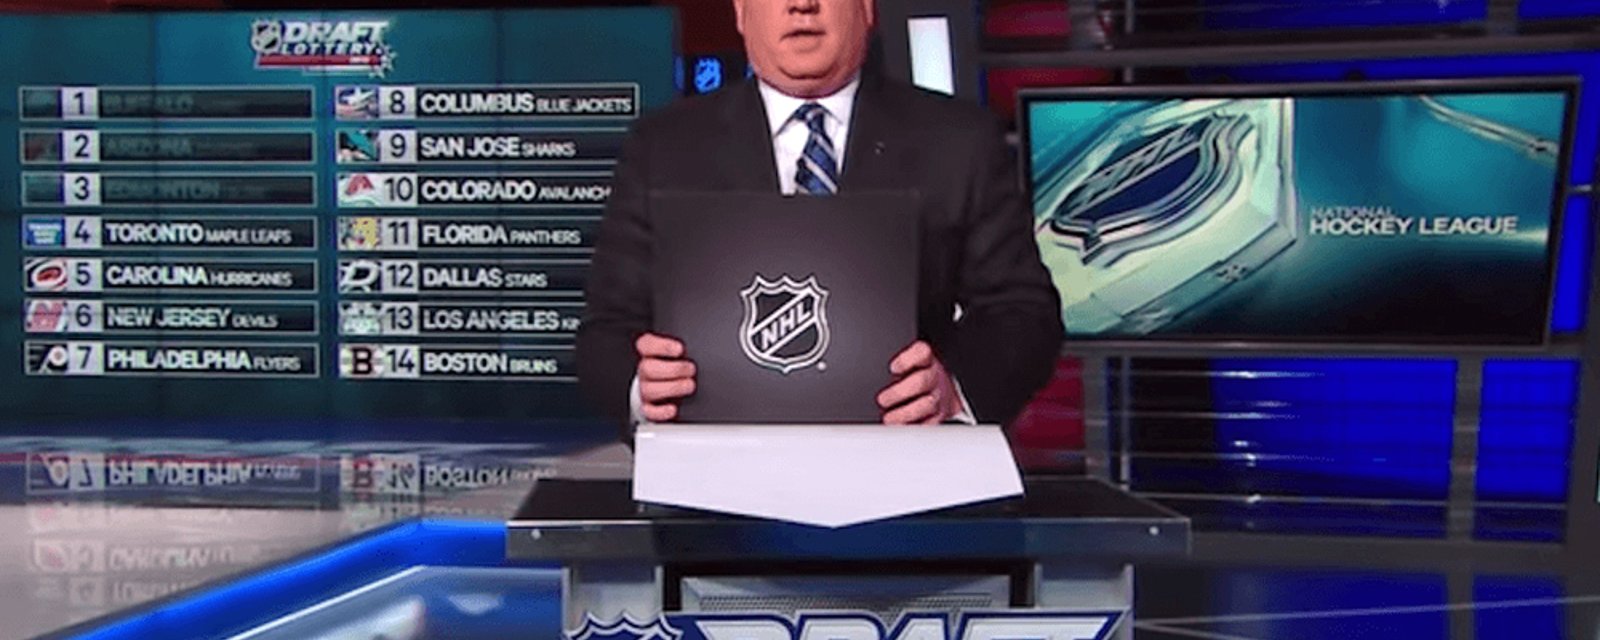 NHL insider Bob McKenzie provides an update on the Draft Lottery